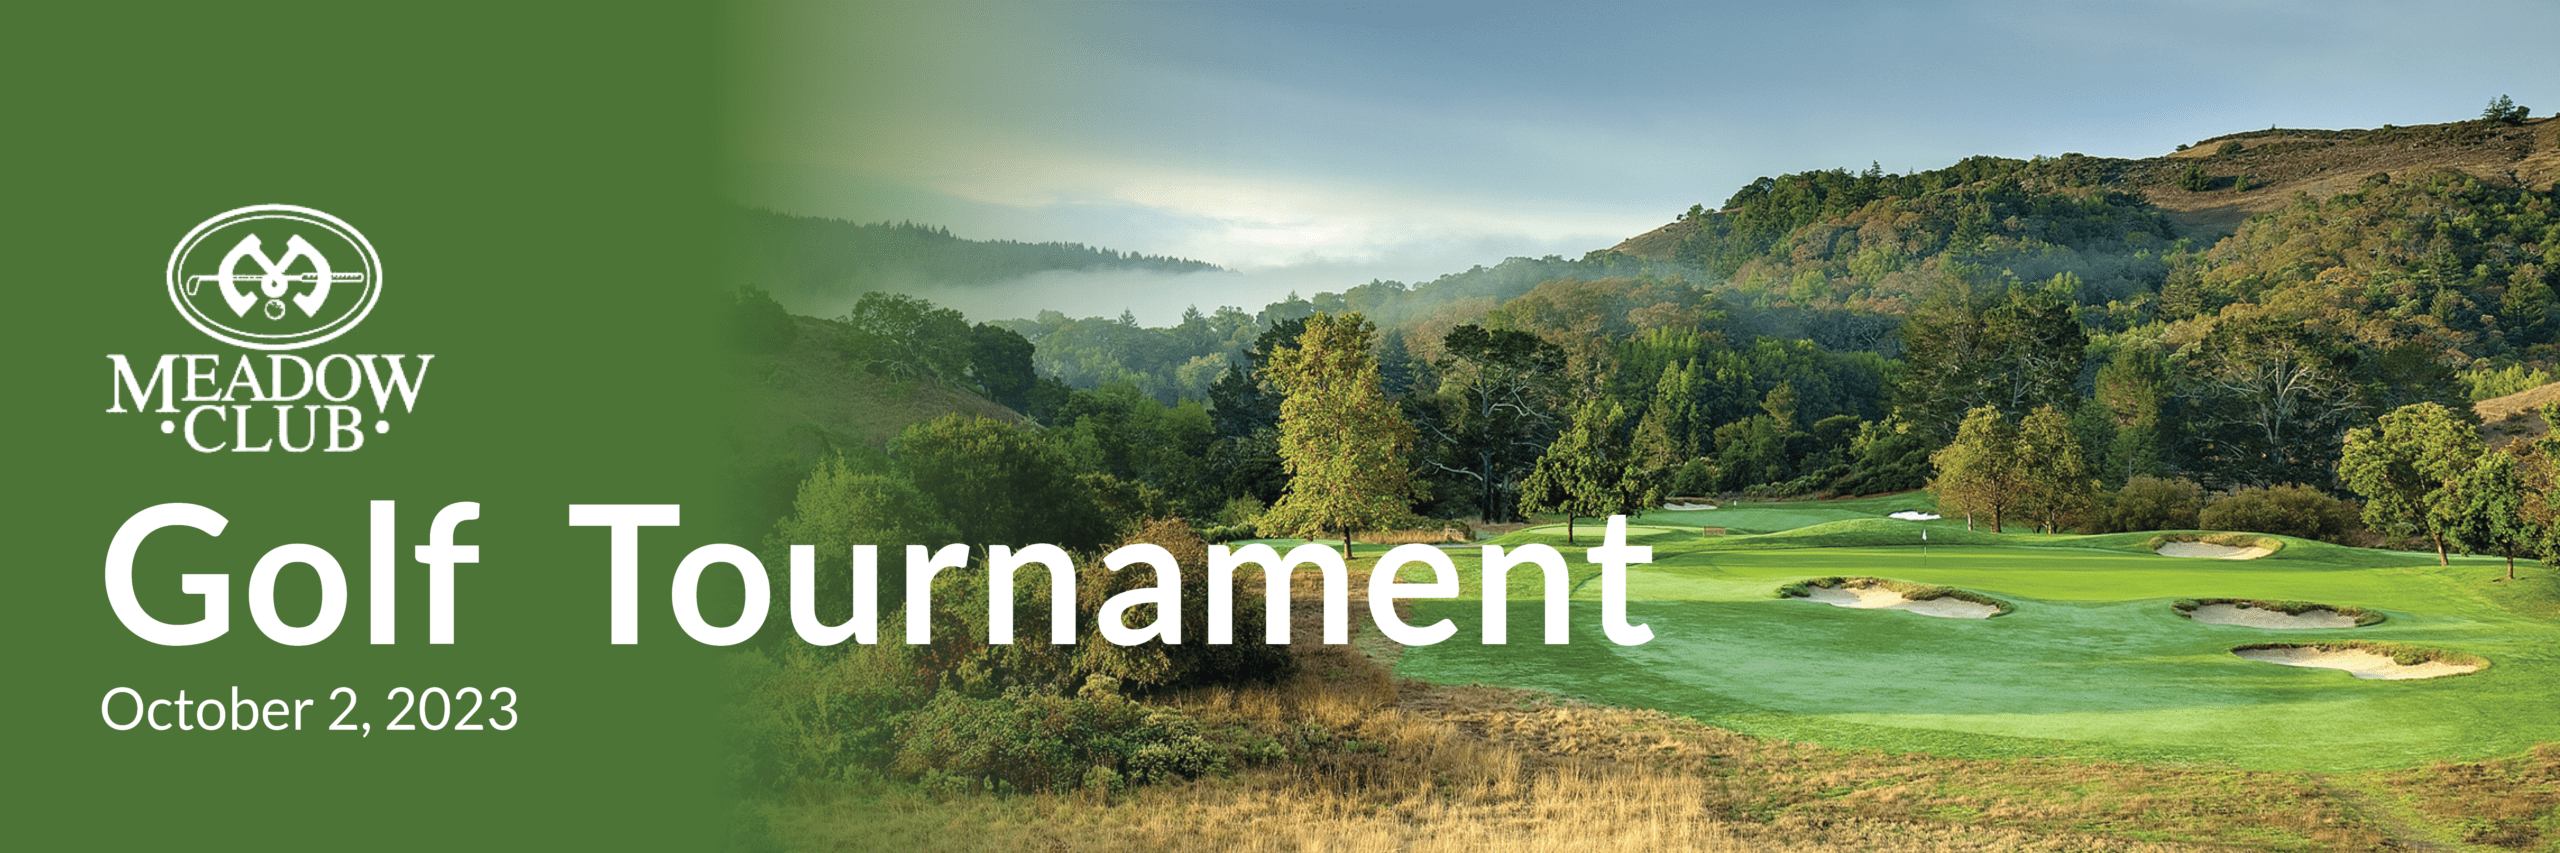 Golf Tournament: Tee Up for Community Health Care! - Marin Community Clinic